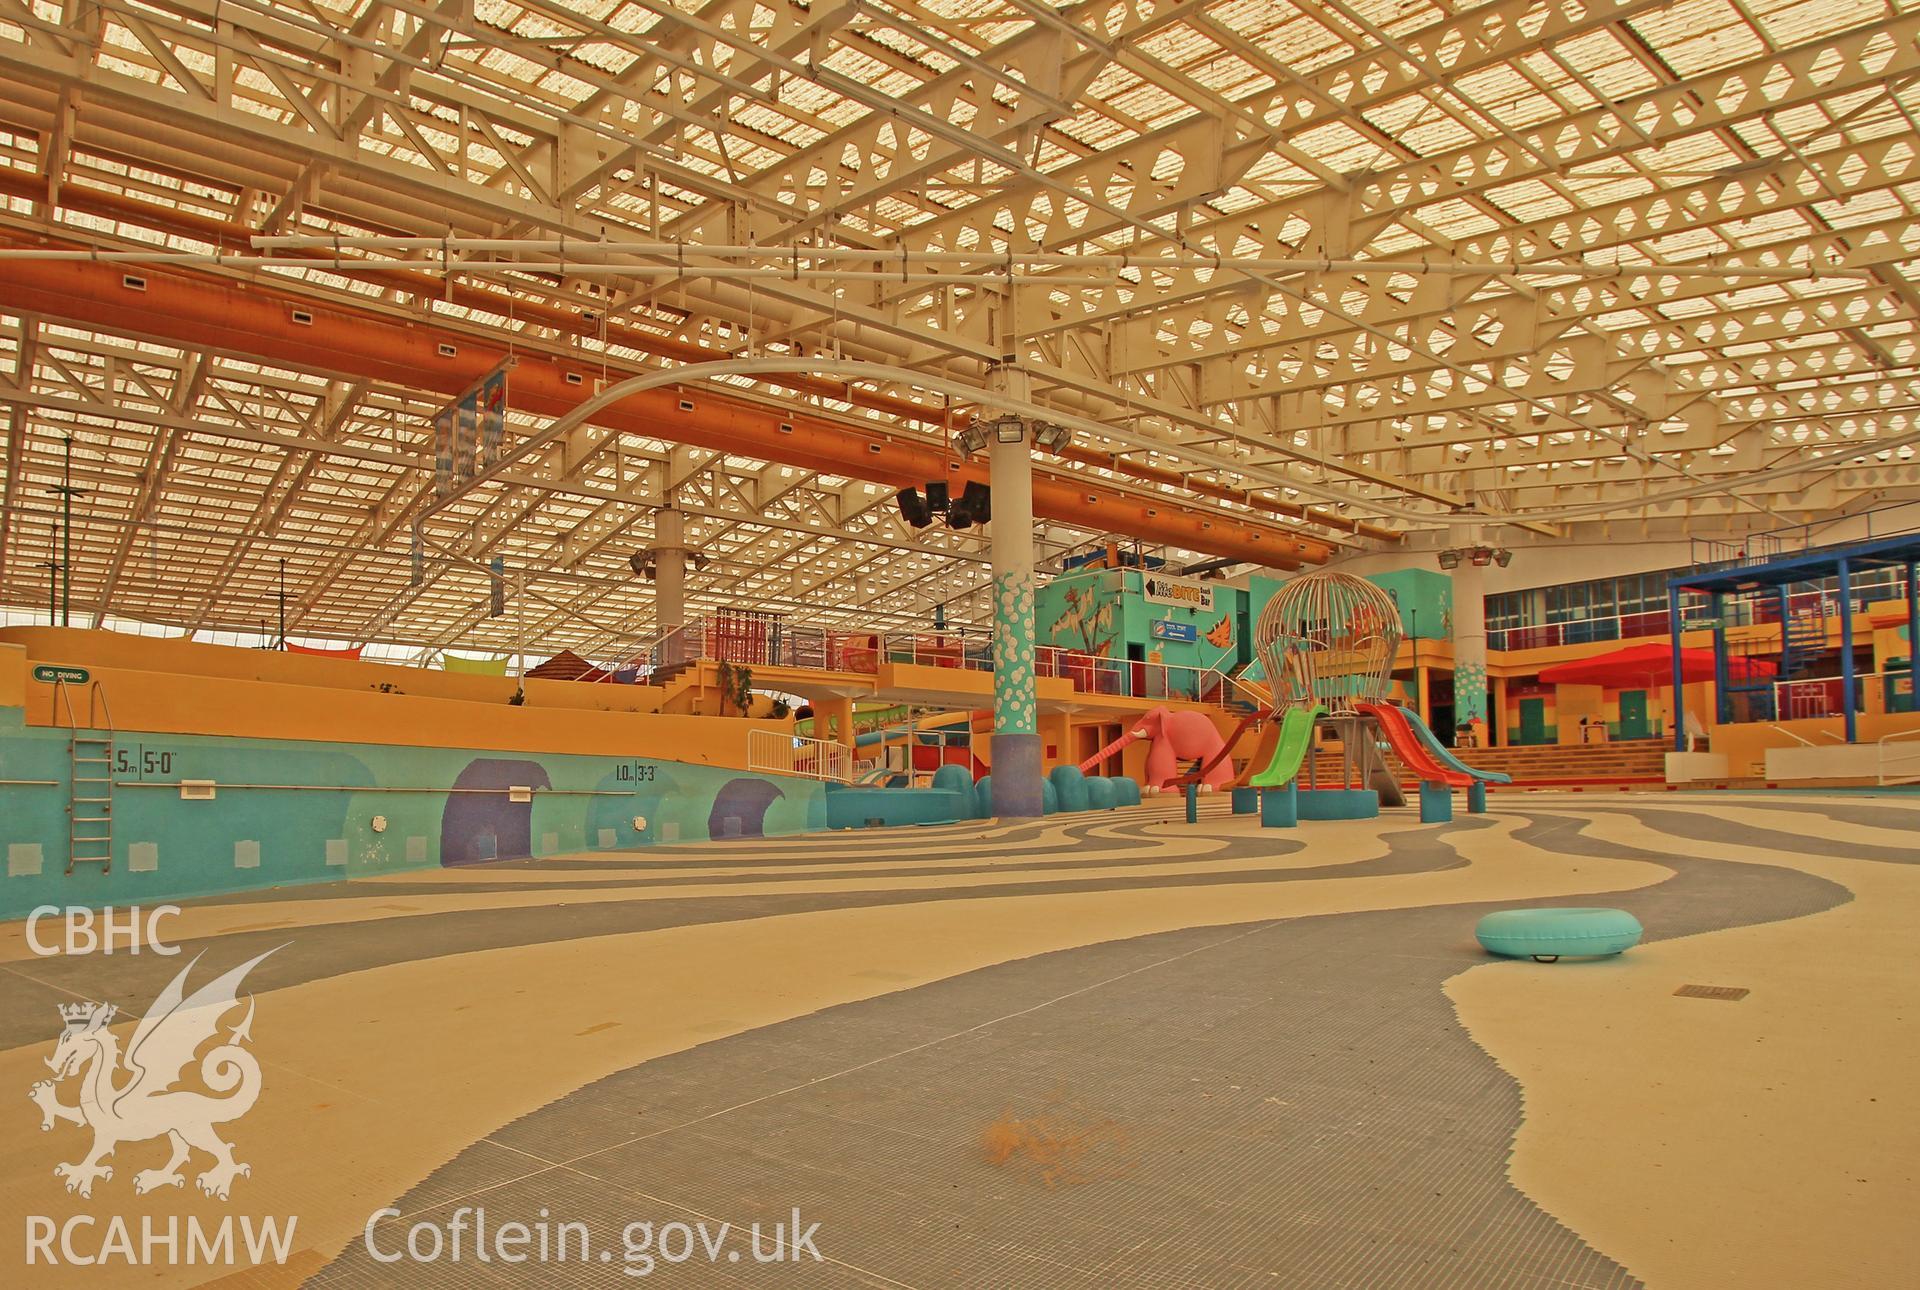 The main pool at Rhyl Sun Centre, taken by Sue Fielding, 27th May 2016.